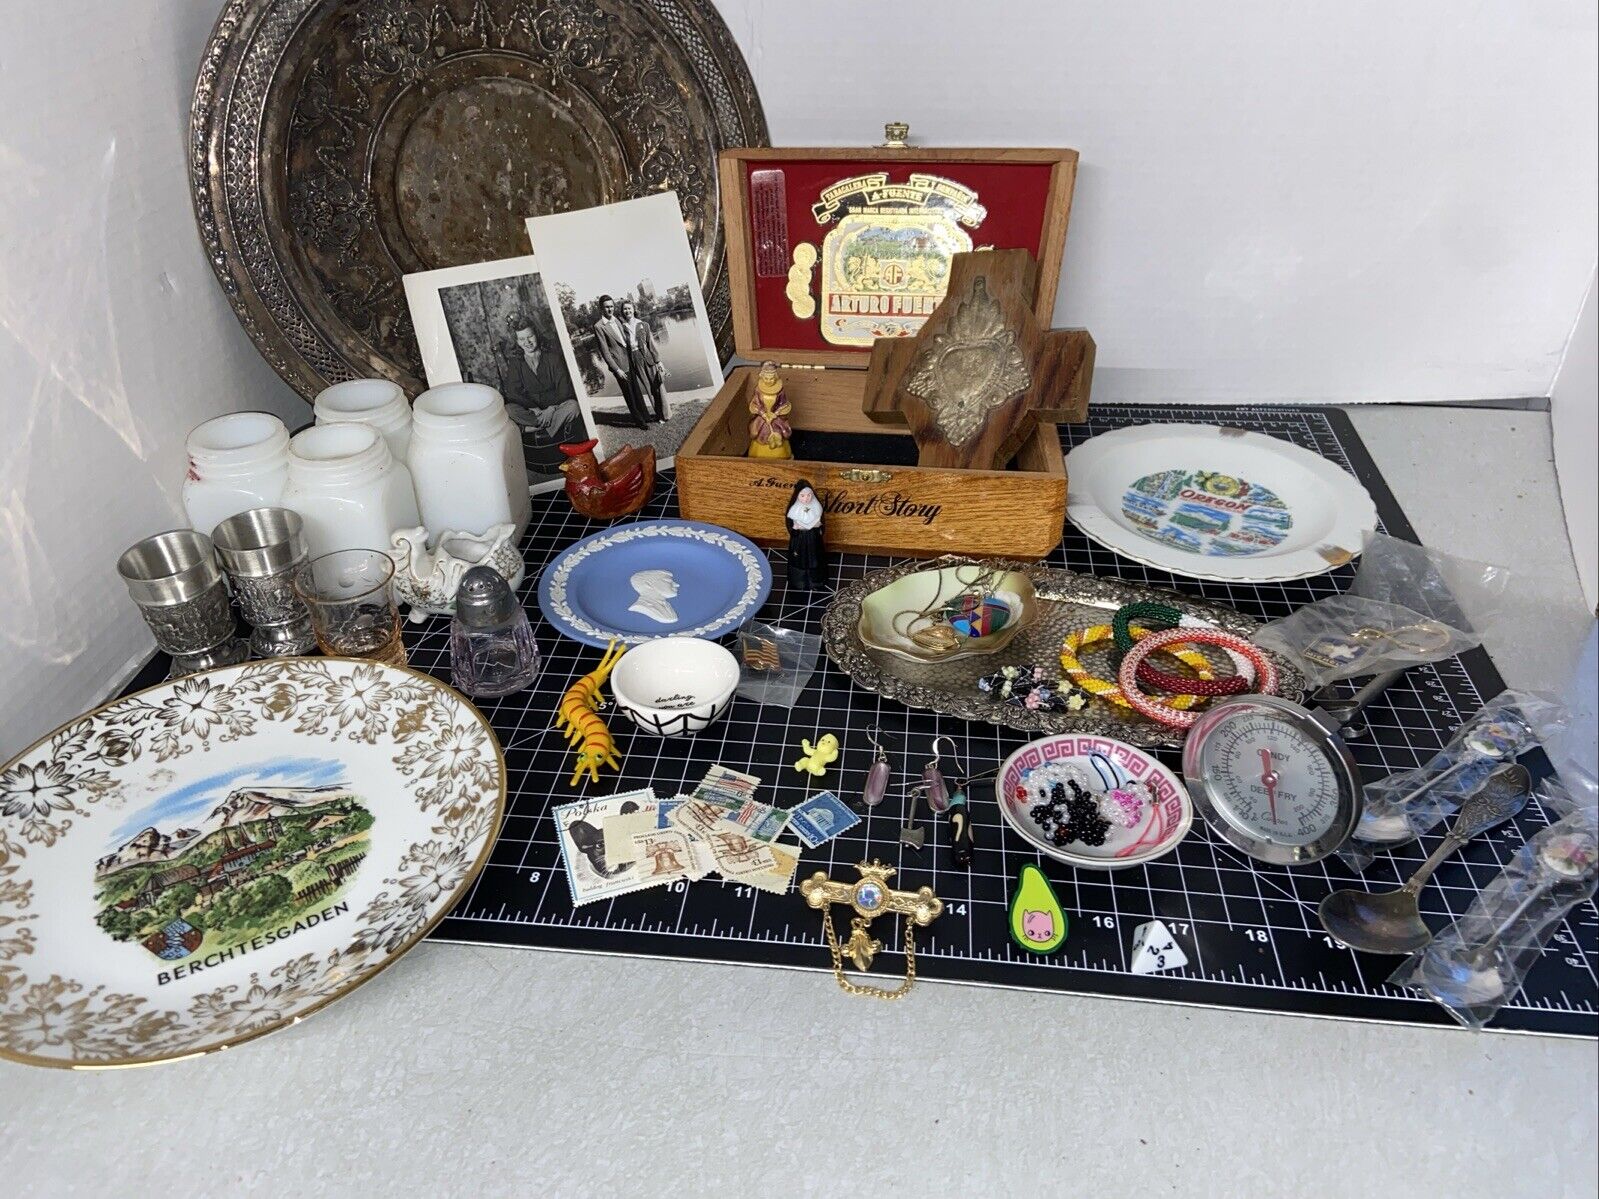 Some Vintage To Current Misc Junk Drawer Oddities Curiosity Plus Bonus Gifts